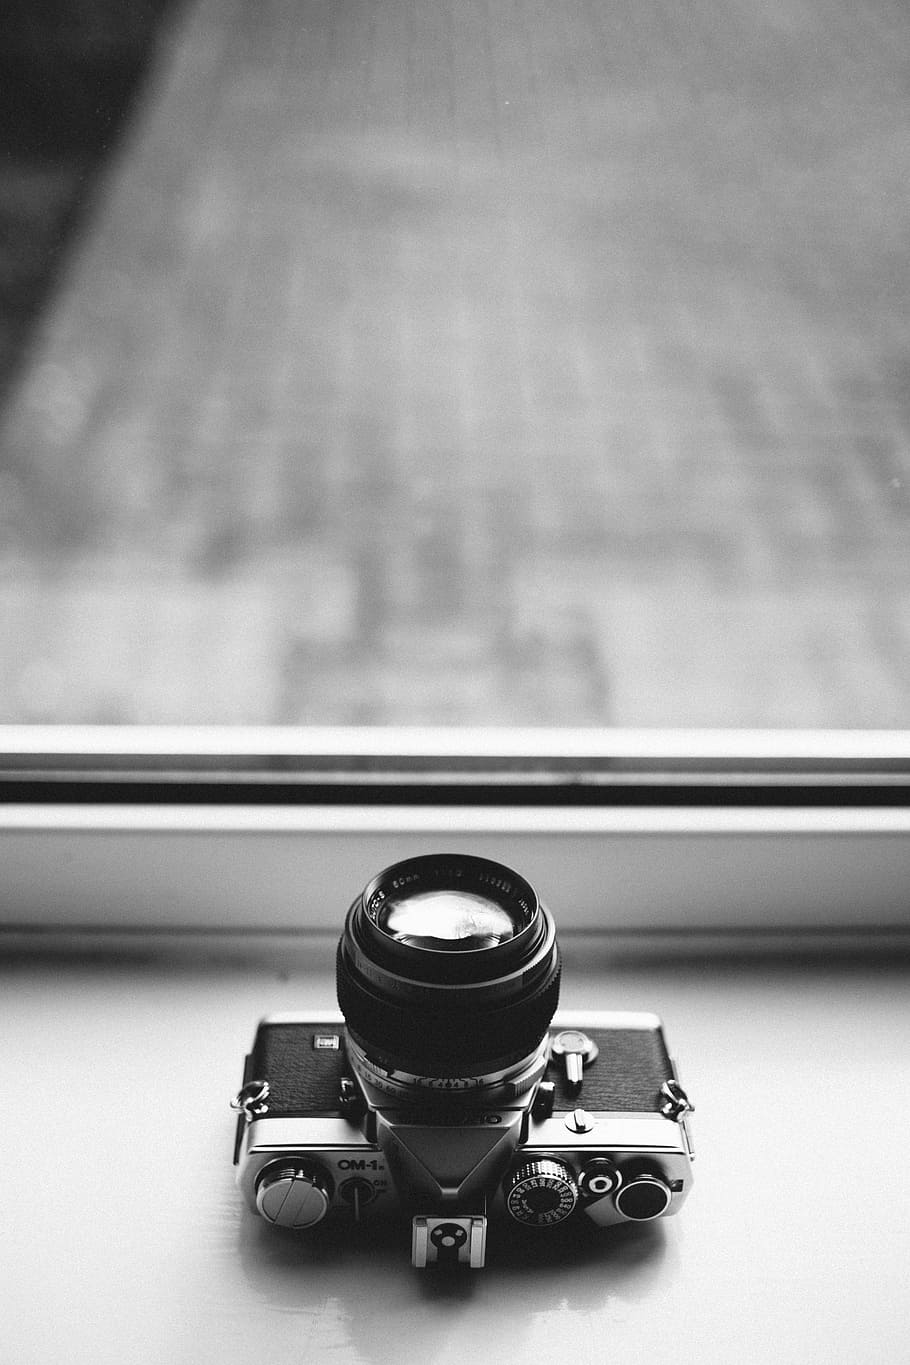 Grayscale Photography of Dslr Camera, Analogue, aperture, black and white